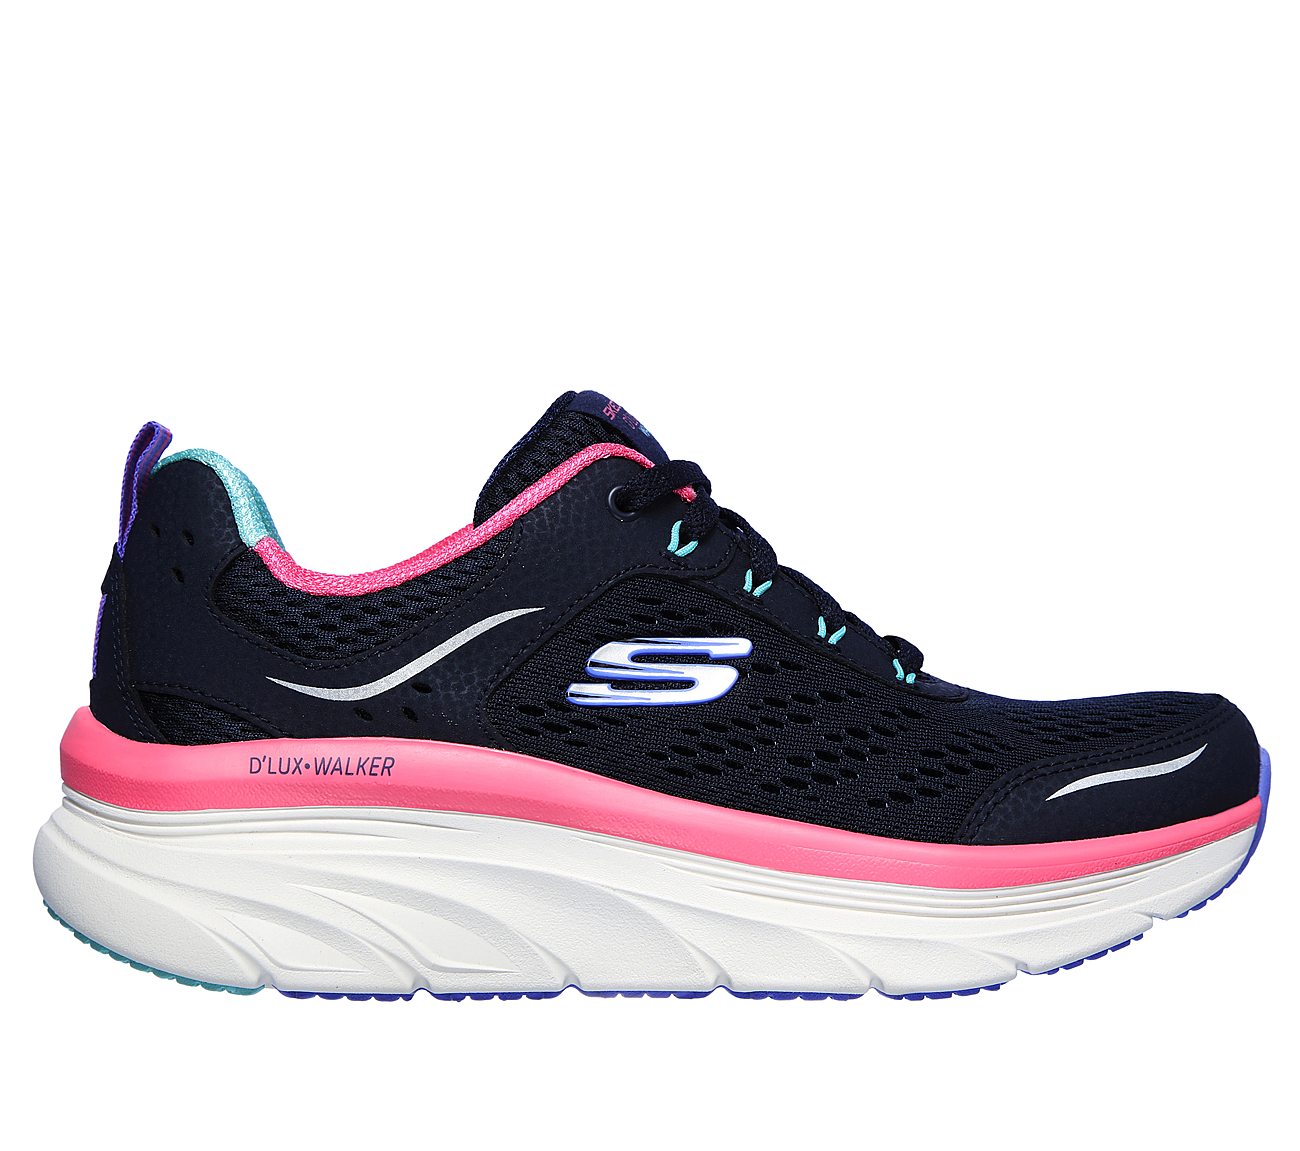 skechers with ankle support